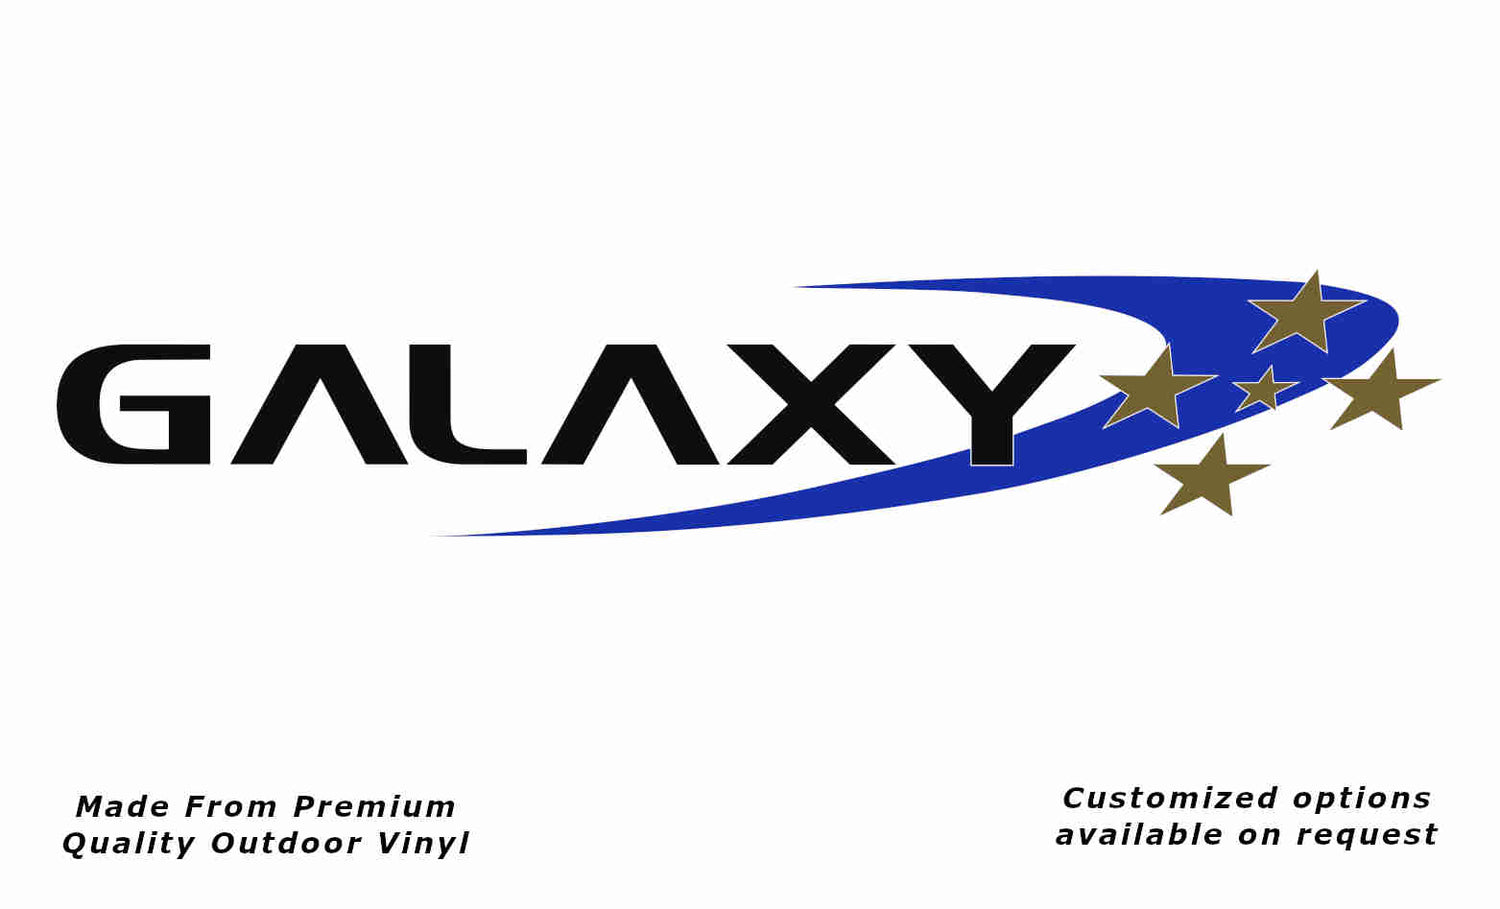 Galaxy caravan replacement vinyl decal sticker in black, gold and brilliant blue.